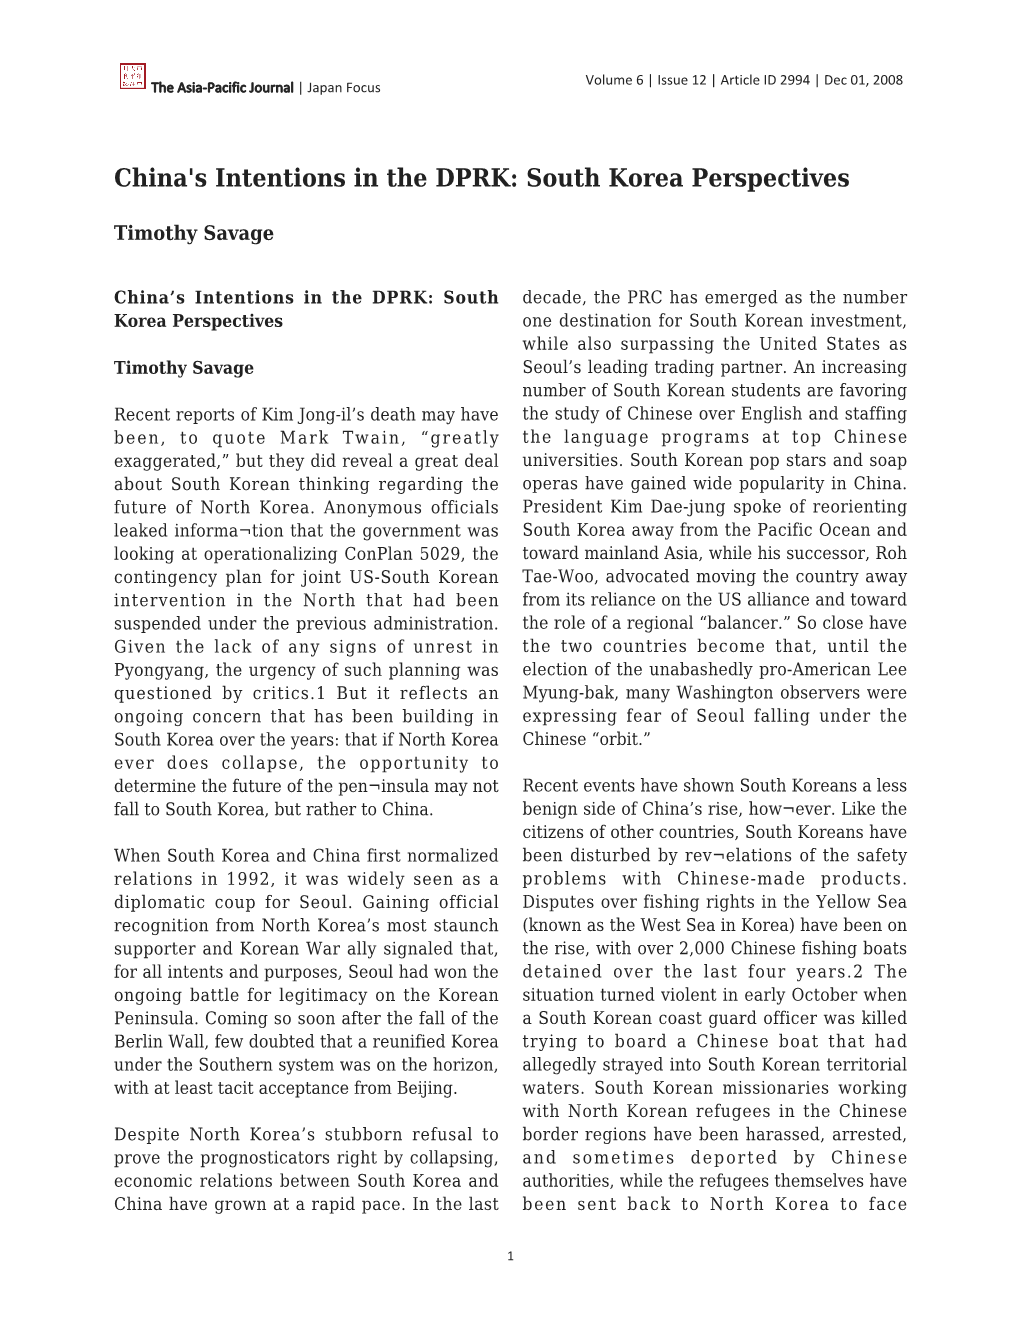 China's Intentions in the DPRK: South Korea Perspectives